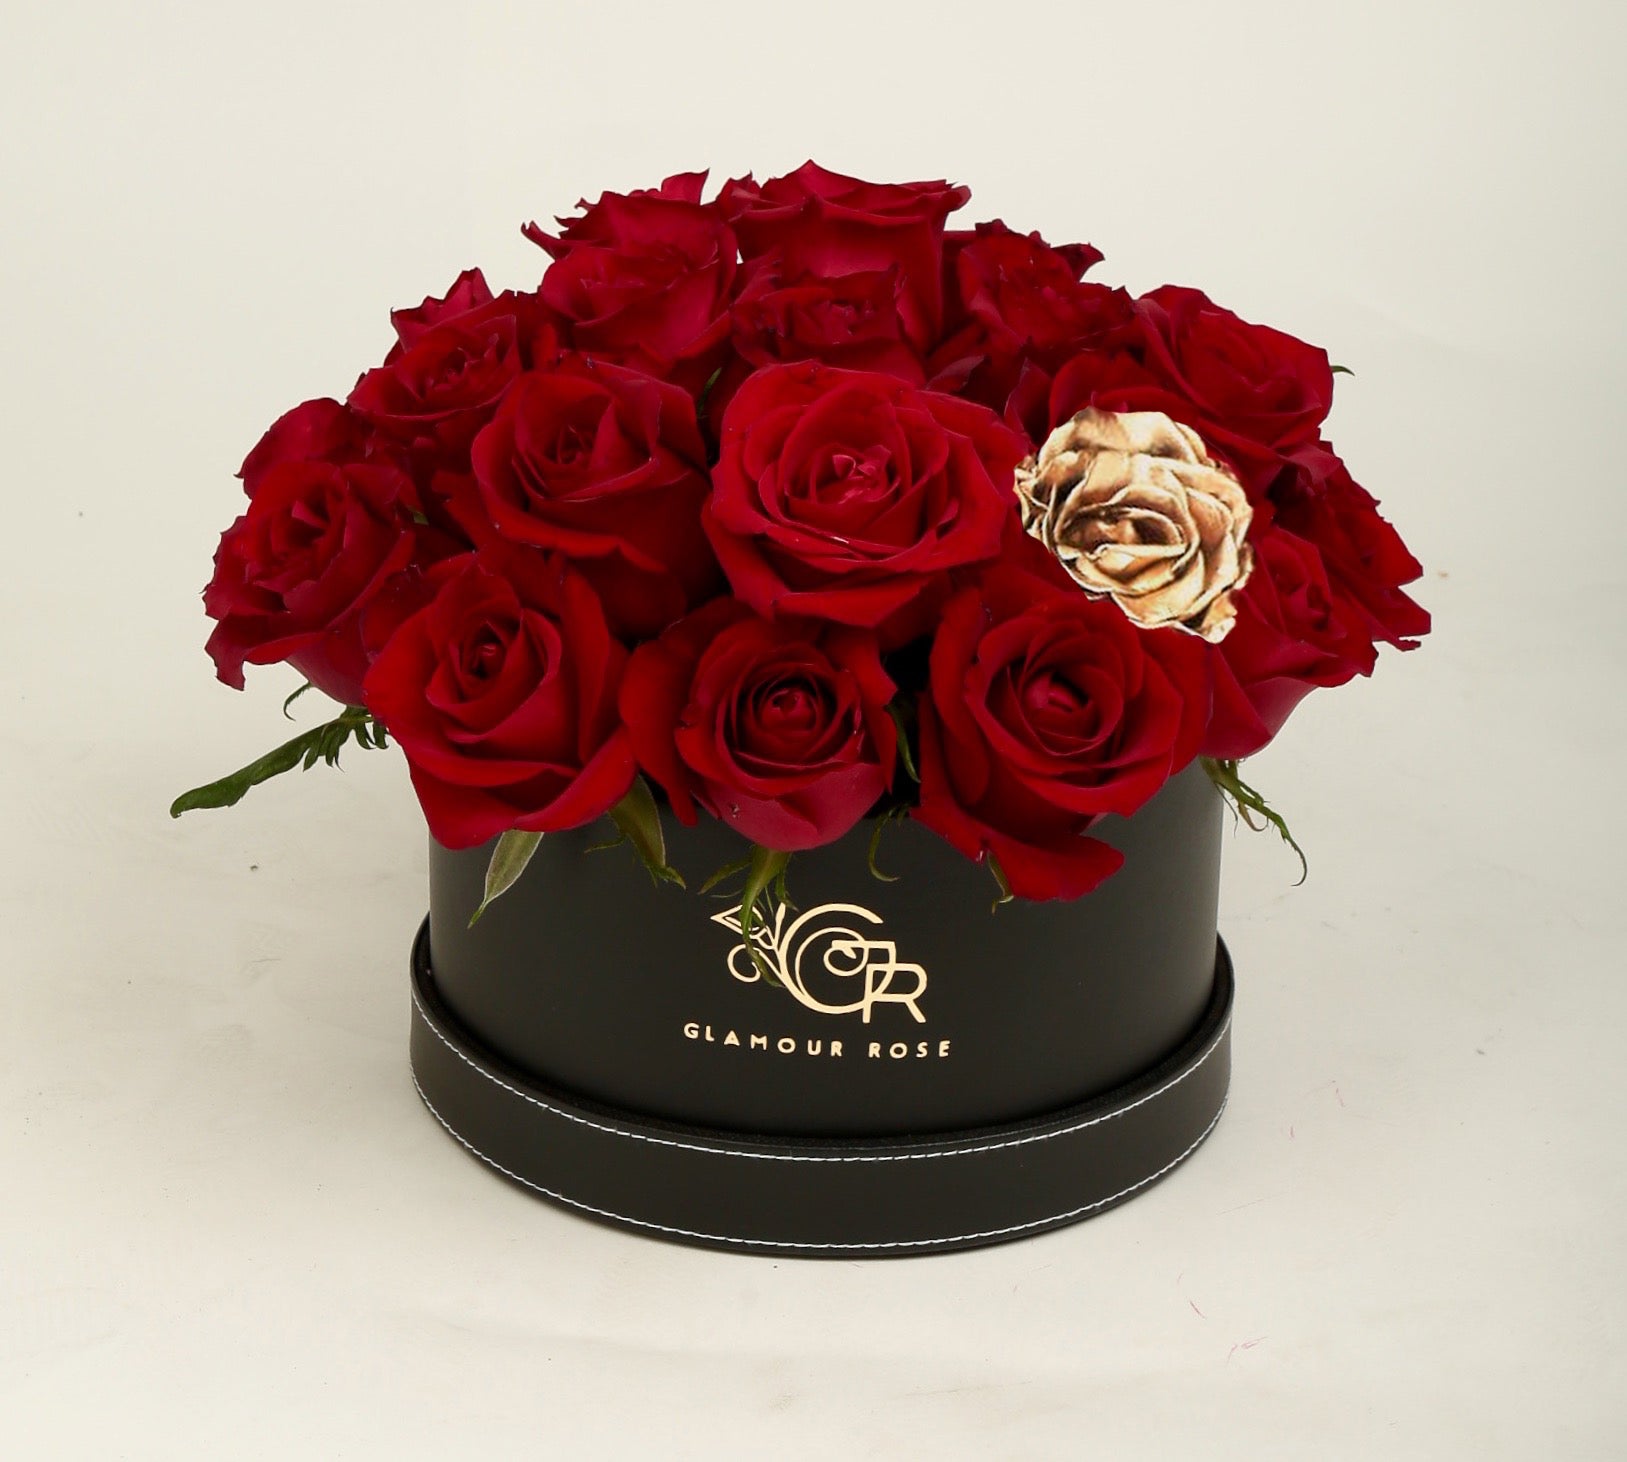 Forever Yours - Glamour Rose